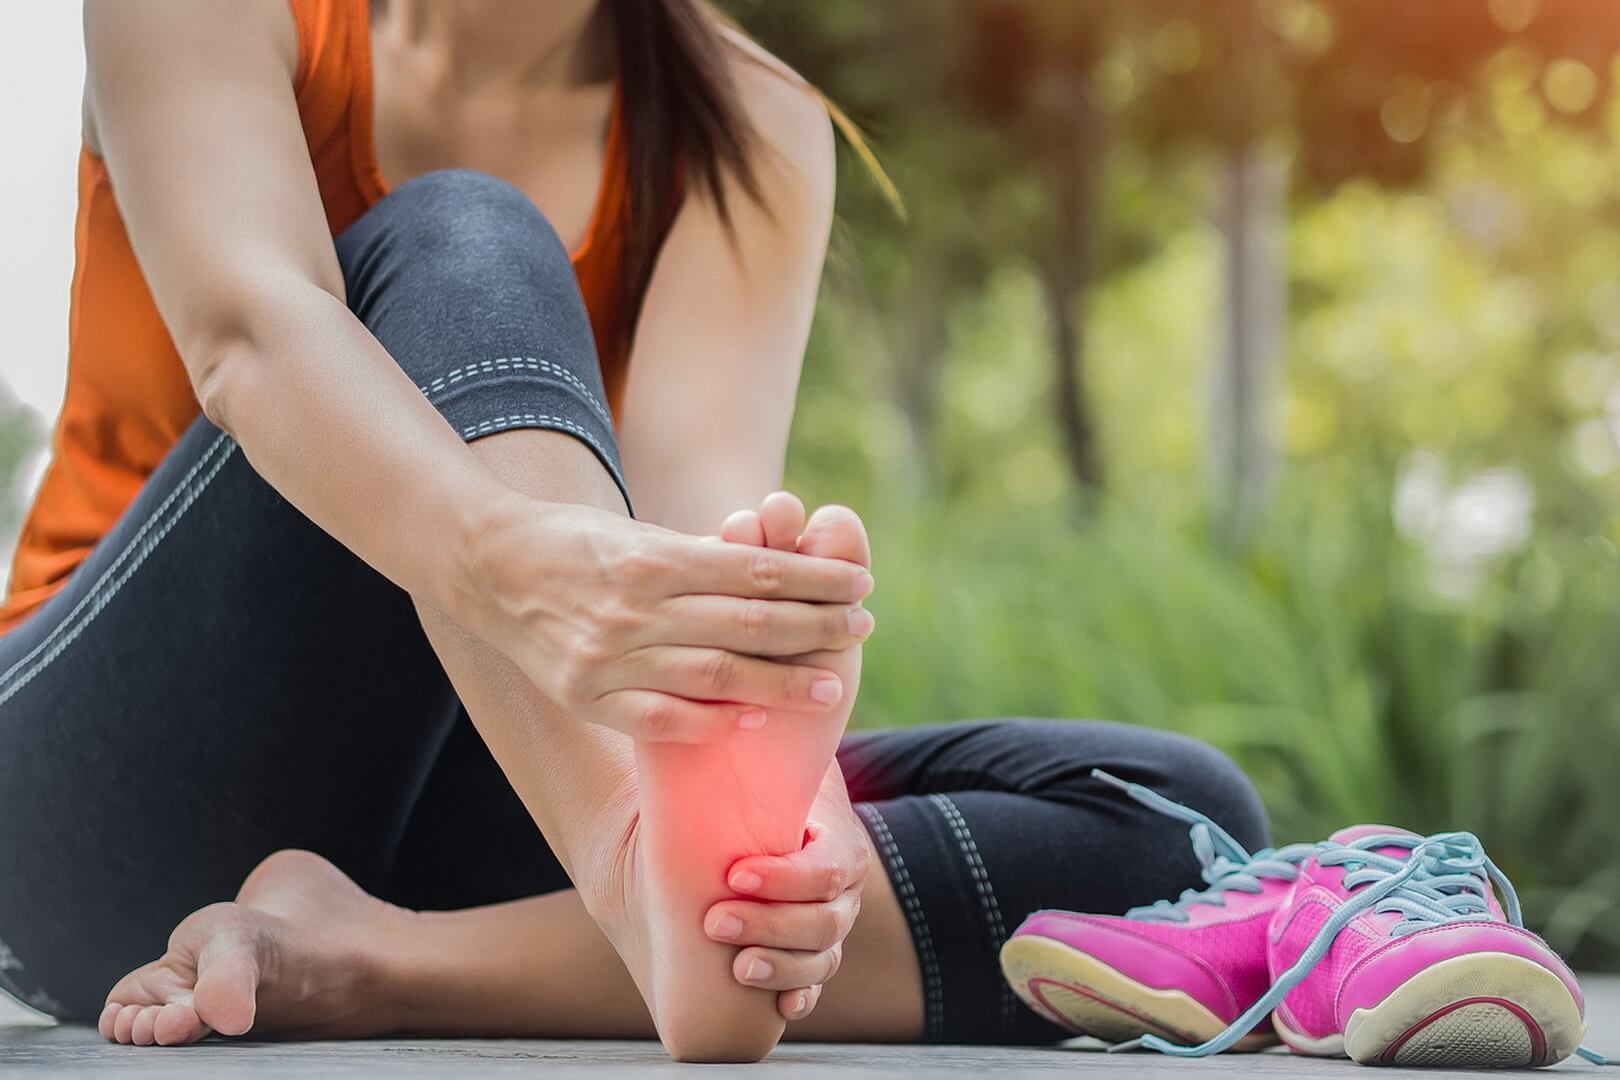 Foot and Ankle Pain: Causes, Symptoms, Treatment & Exercises